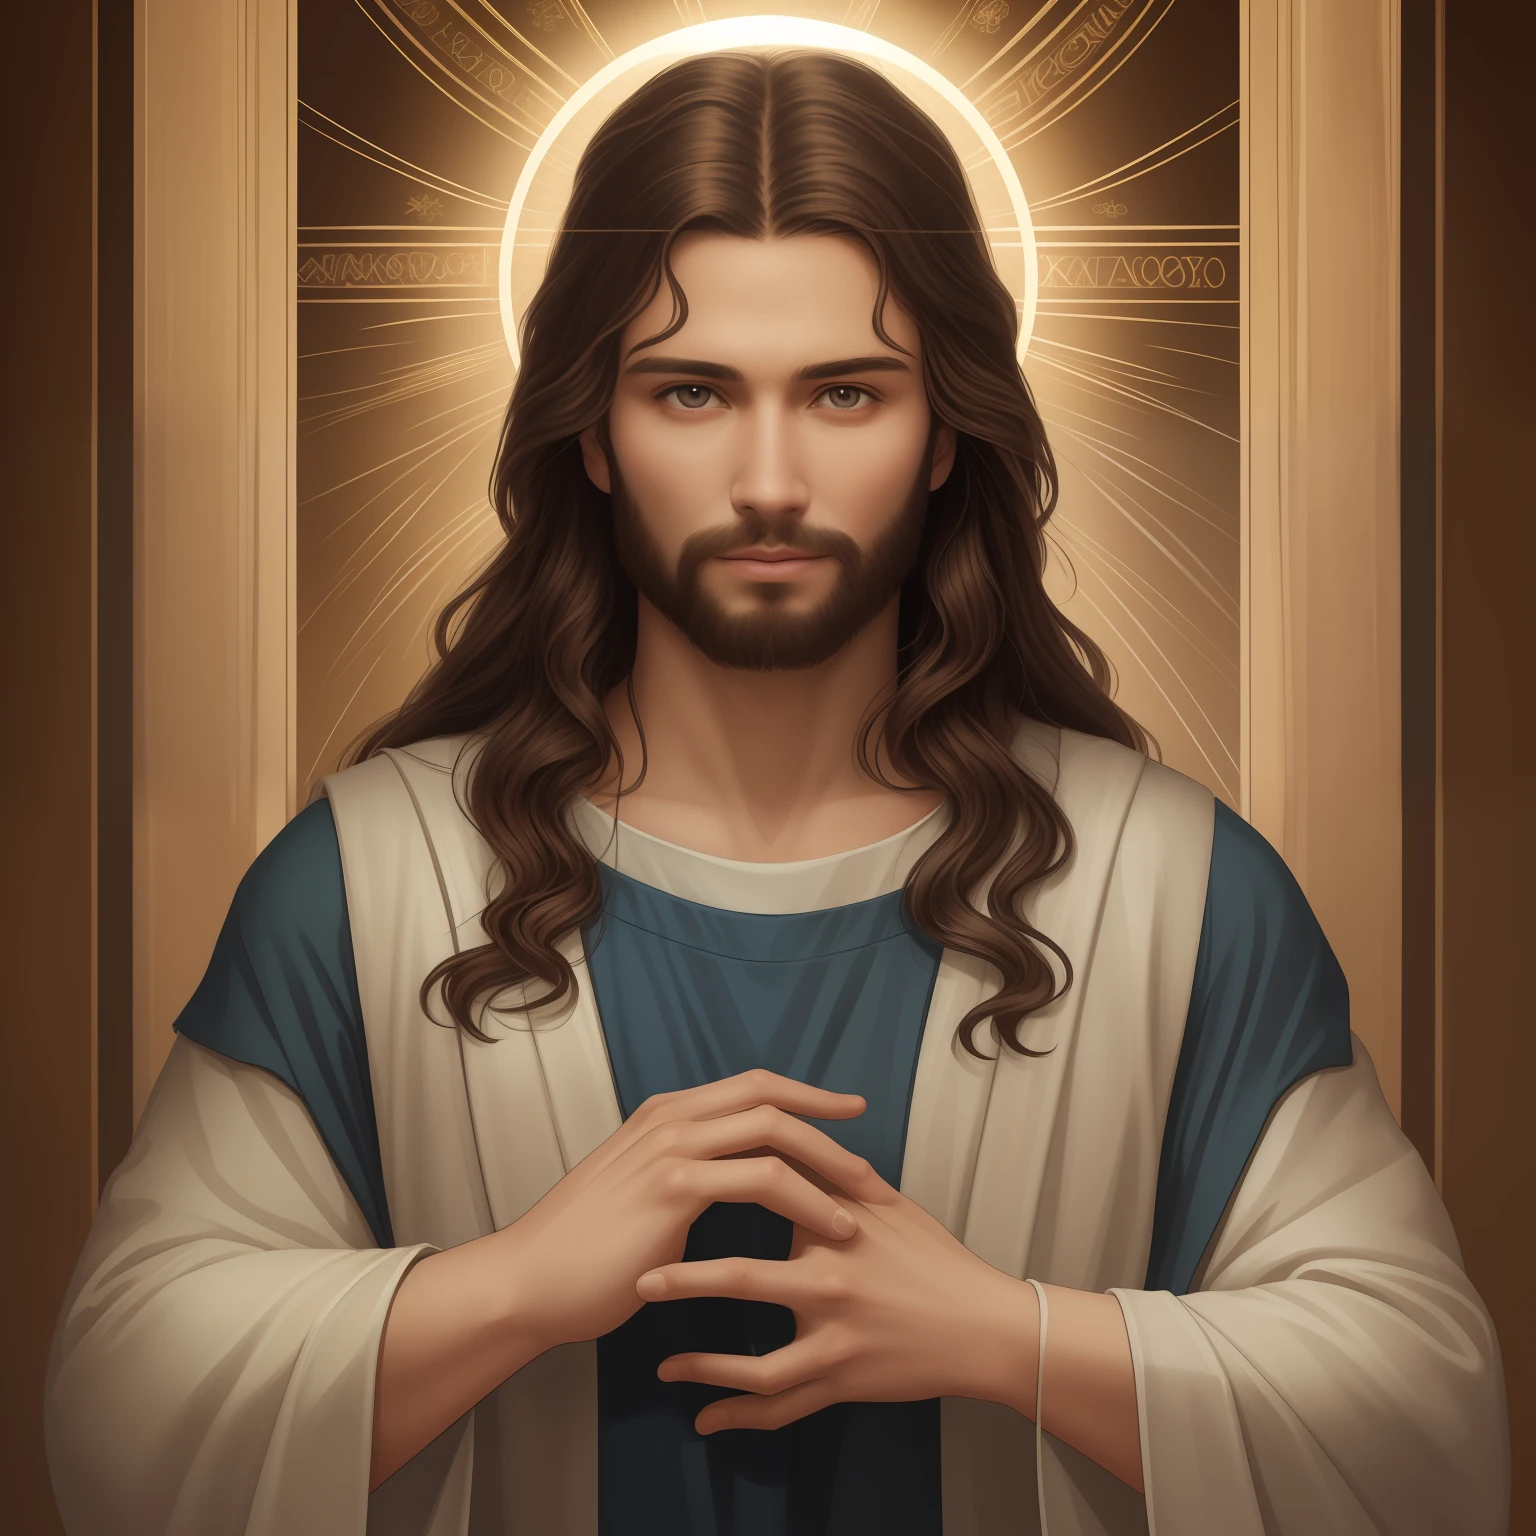 a 3D Realistic of jesus with a halo in the sky, jesus christ, smiling in heaven, portrait of jesus christ, jesus face, 33 young almighty god, portrait of a heavenly god, greg olsen, gigachad jesus, jesus of nazareth, jesus, the face of god, god looking at me, he is greeting you warmly, he is happy, avatar image